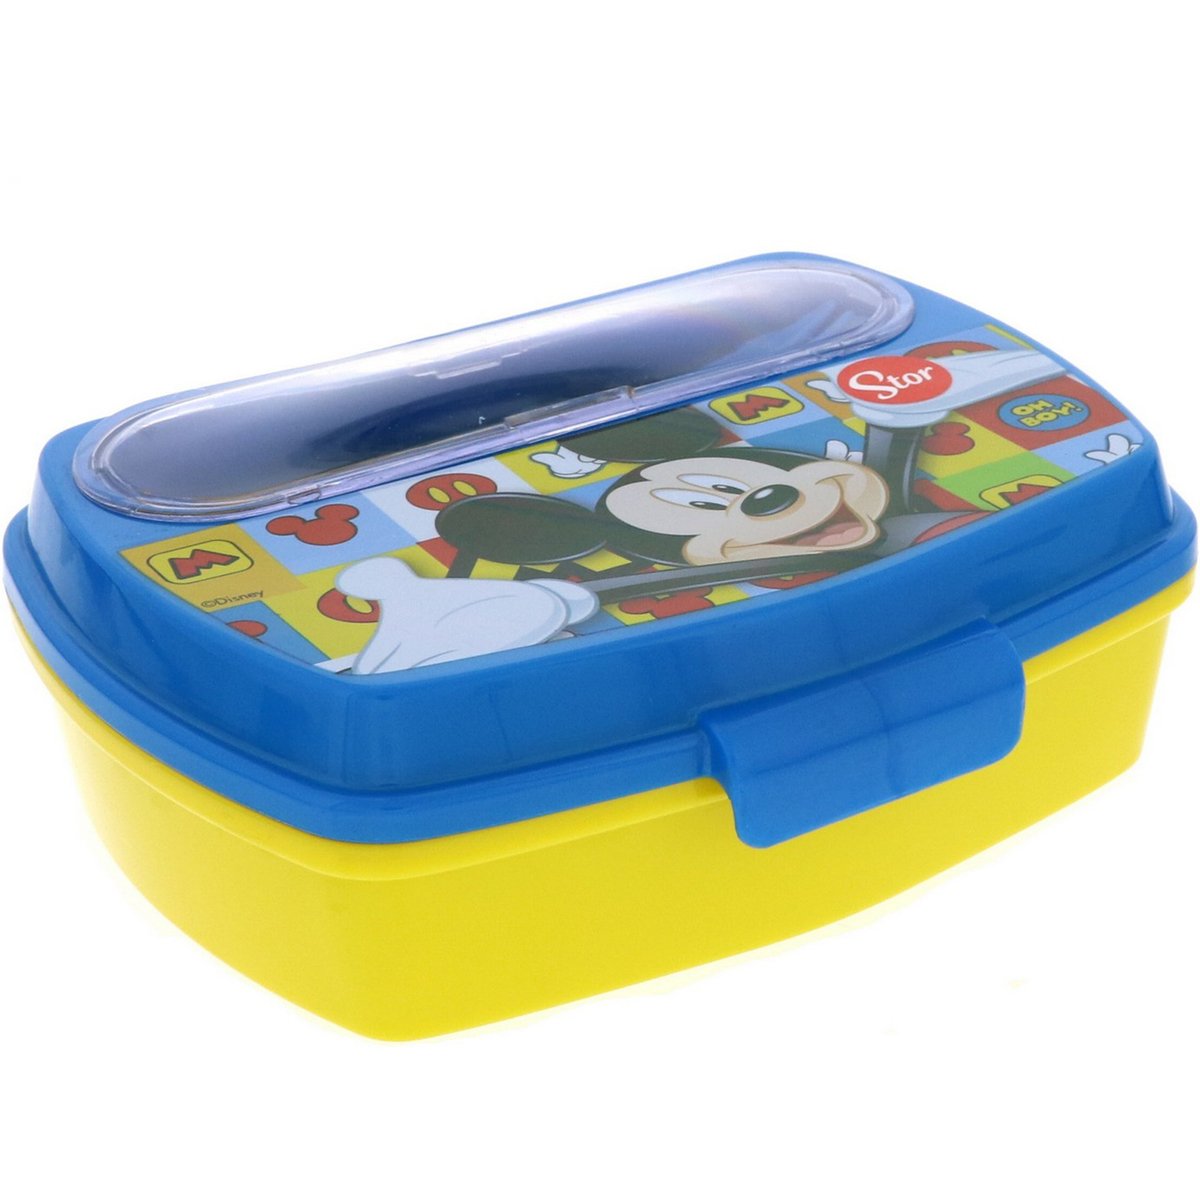 Mickey Mouse Sandwich Box With Cutlery 19009